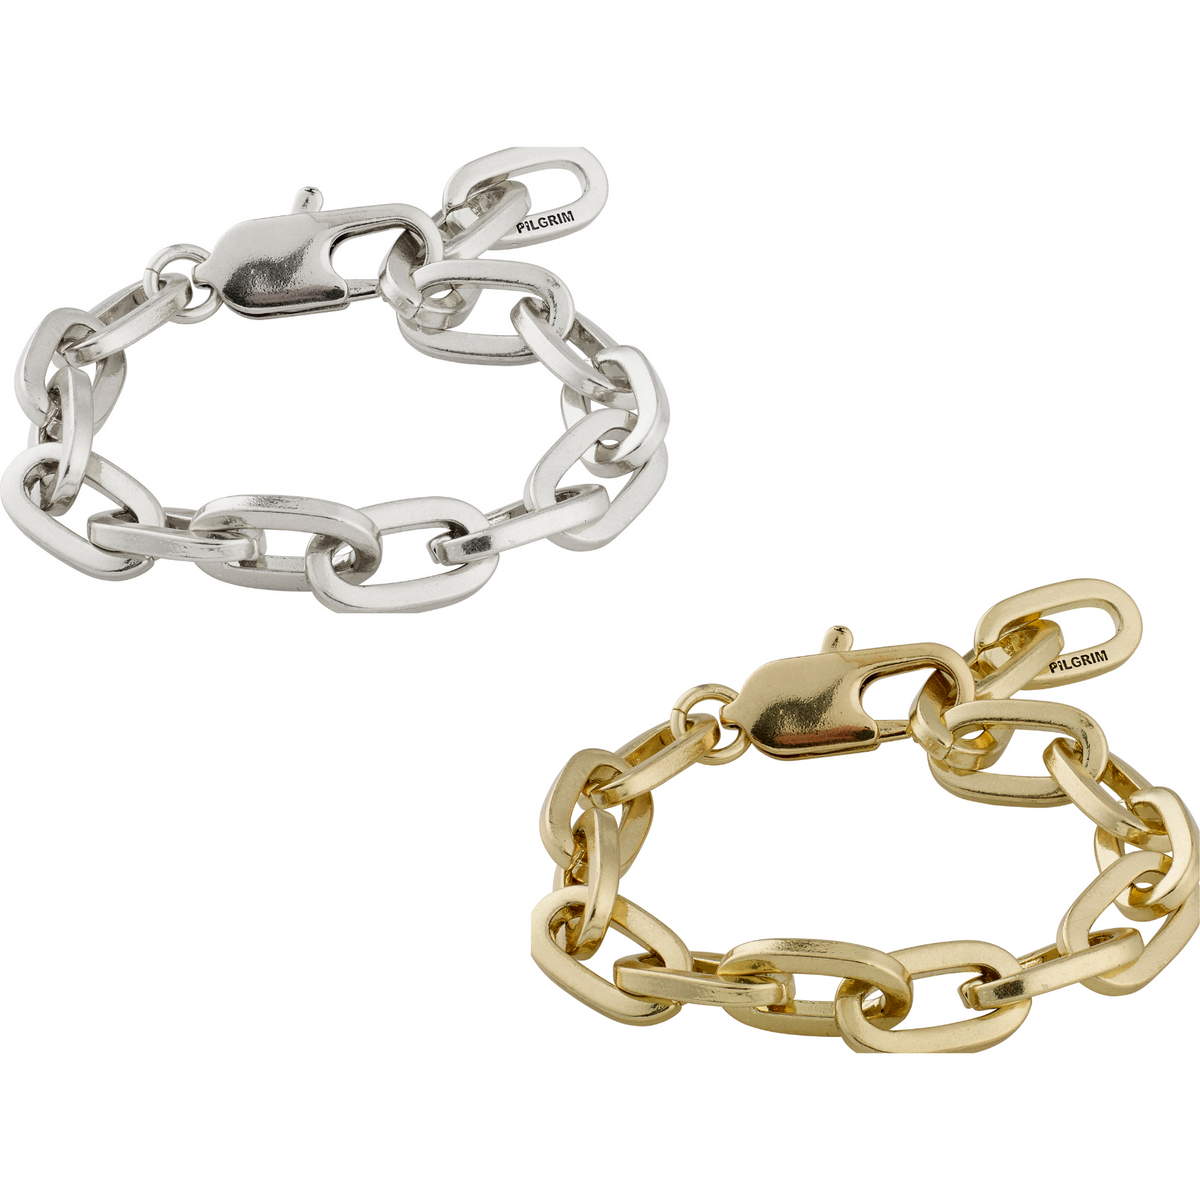 A chunky link bracelet with a statement clasp to tie it together for an edgy, raw look.  This bracelet is from our Tolerance collection. Tolerance to us, is the openness to discover common ground and learning from one another and creating strong bonds.  Handmade with heart.  Danish design.  Gold or silver plated.  Chain link measures 20 cm    